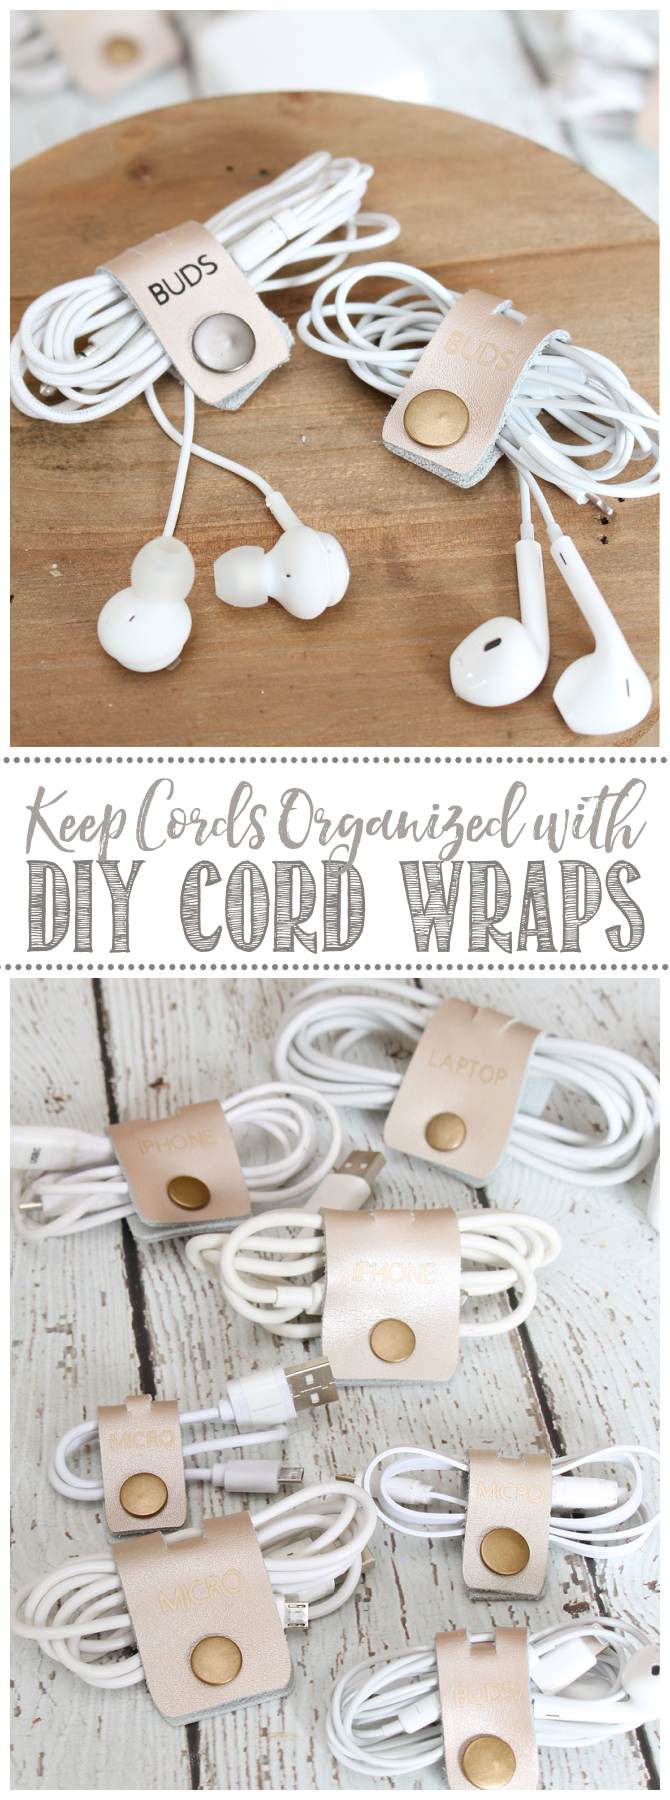 DIY cord wraps with leather strap and snap fasteners.